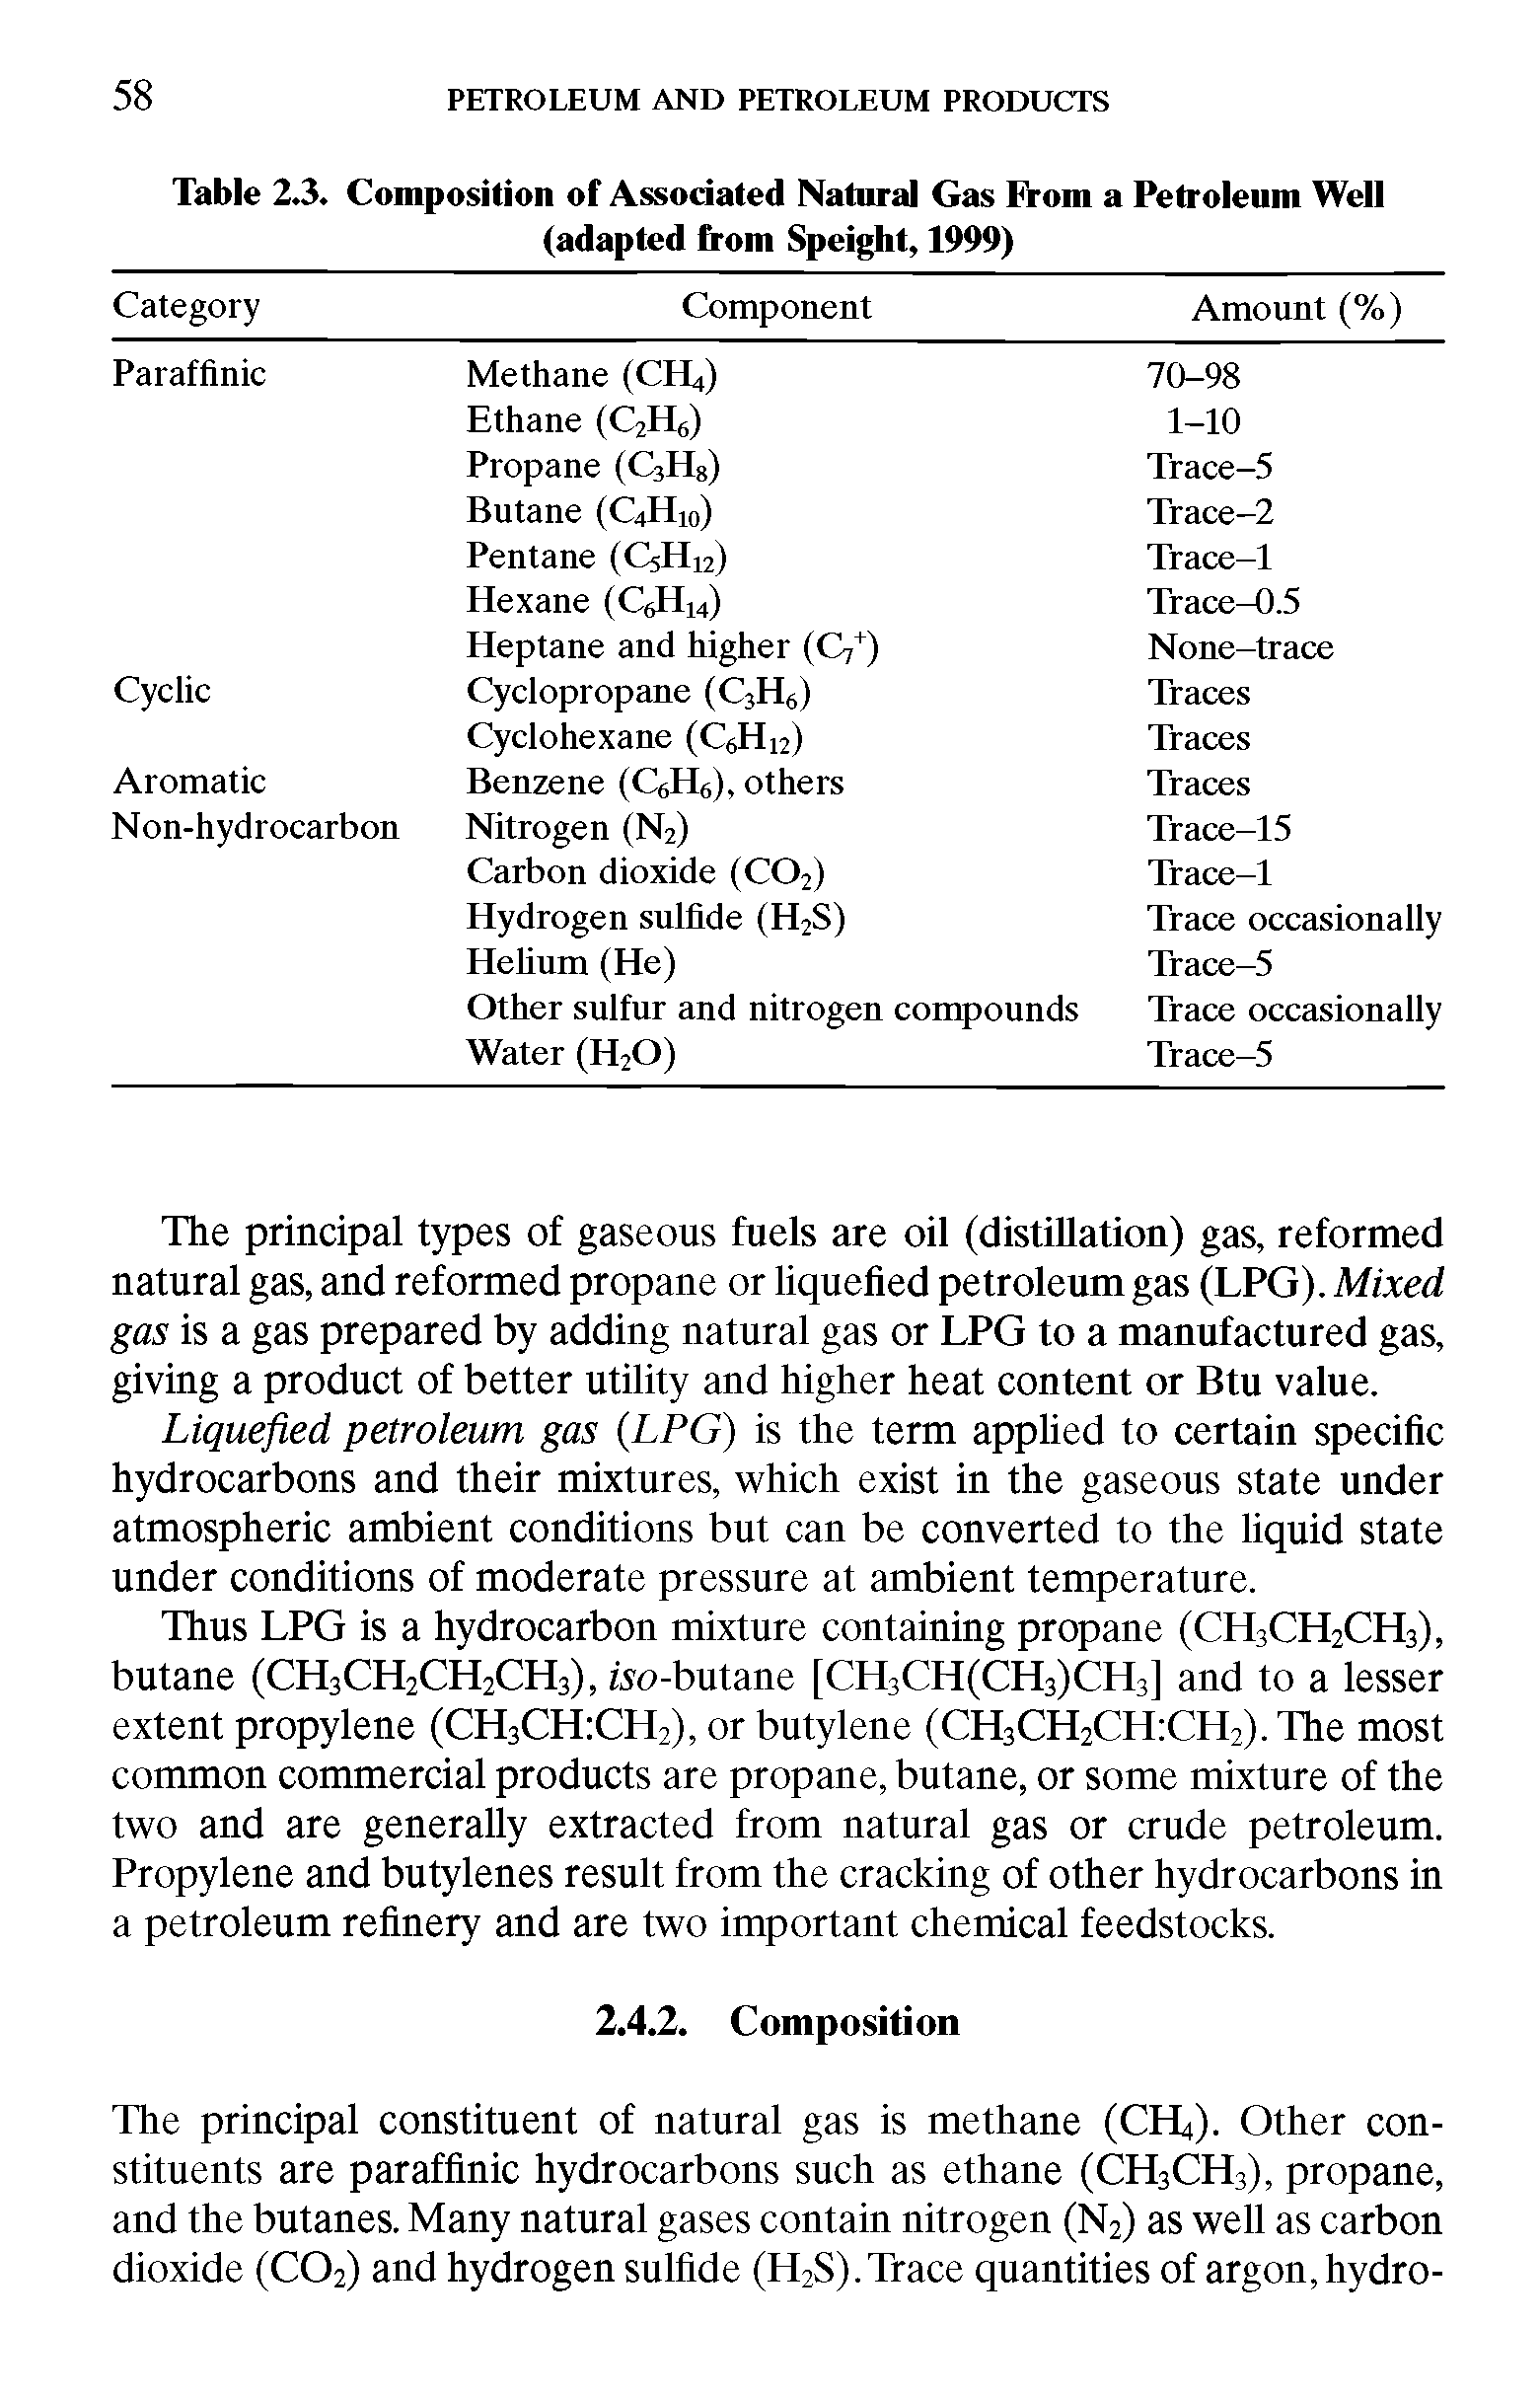 Table 23. Composition of Assodated Natural Gas From a Petroleum Well (adapted from Speight, 1999)...